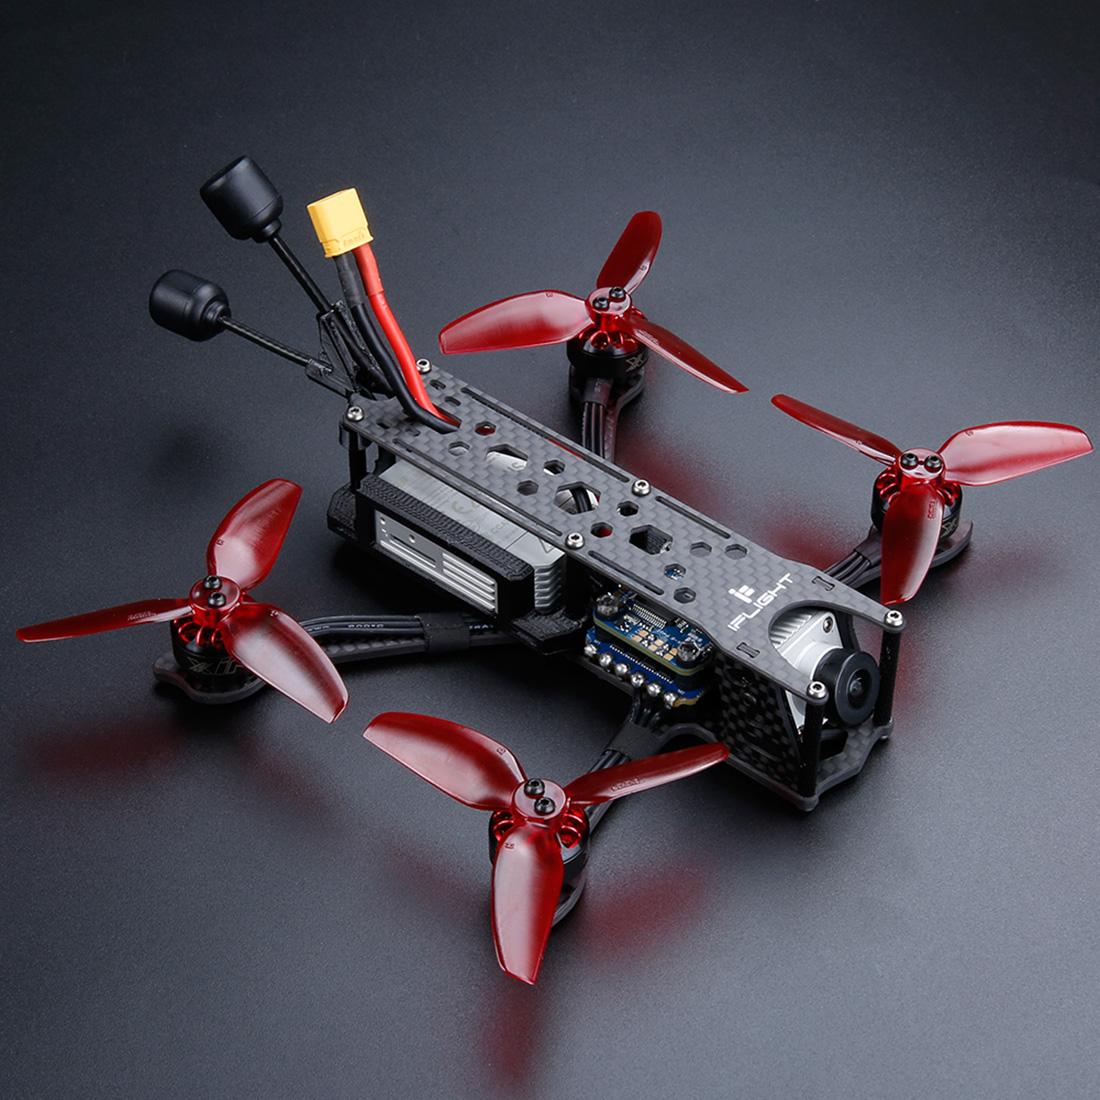 iFlight DC3 3inch 144mm HD FPV Freestyle Quadcopter Racing